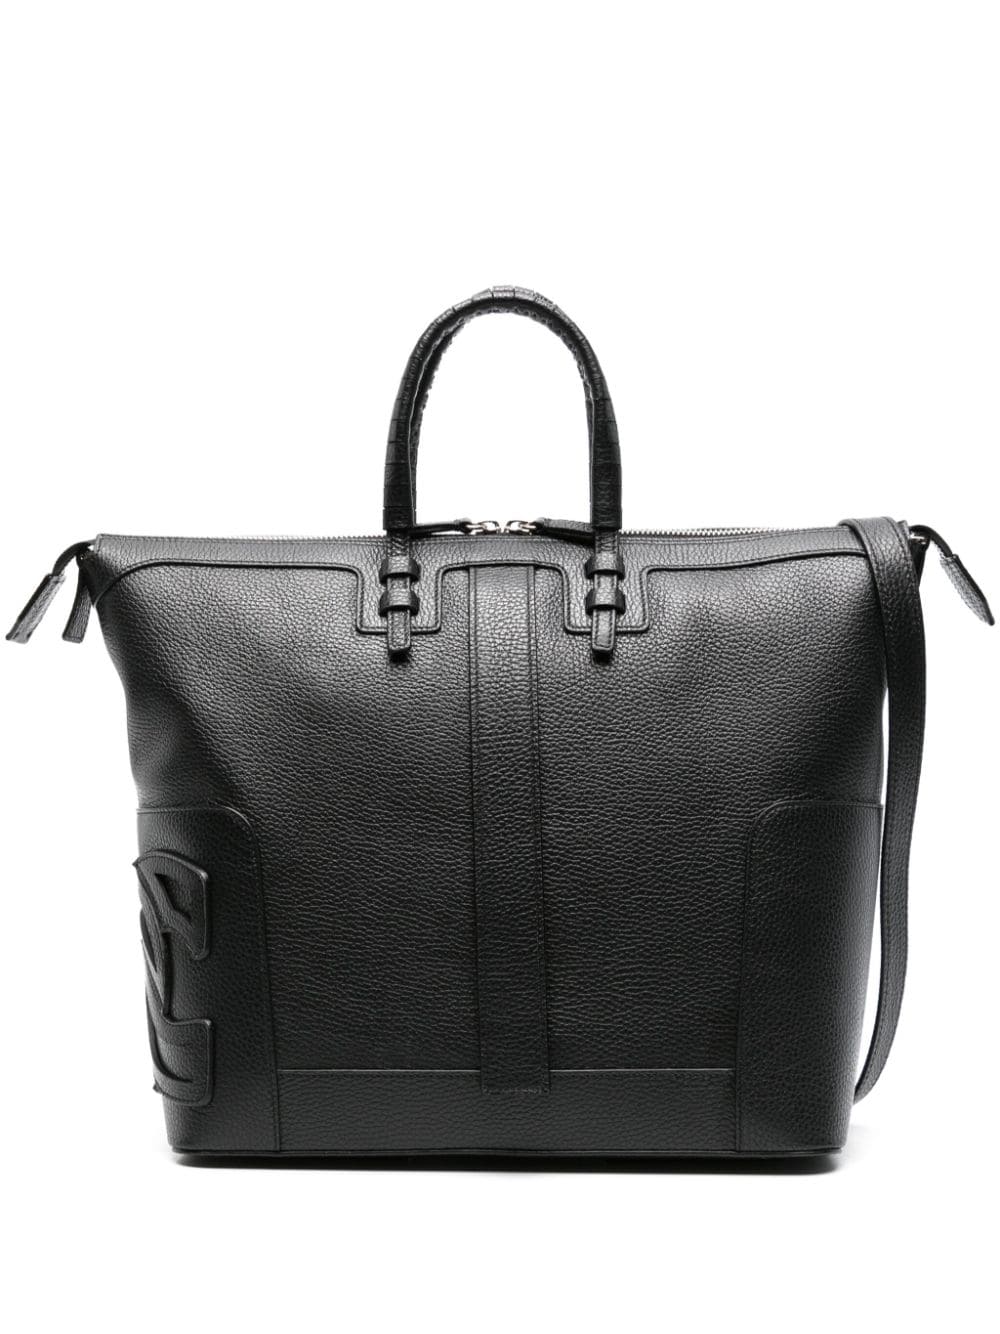 Casadei C-style Leather Tote Bag In Black